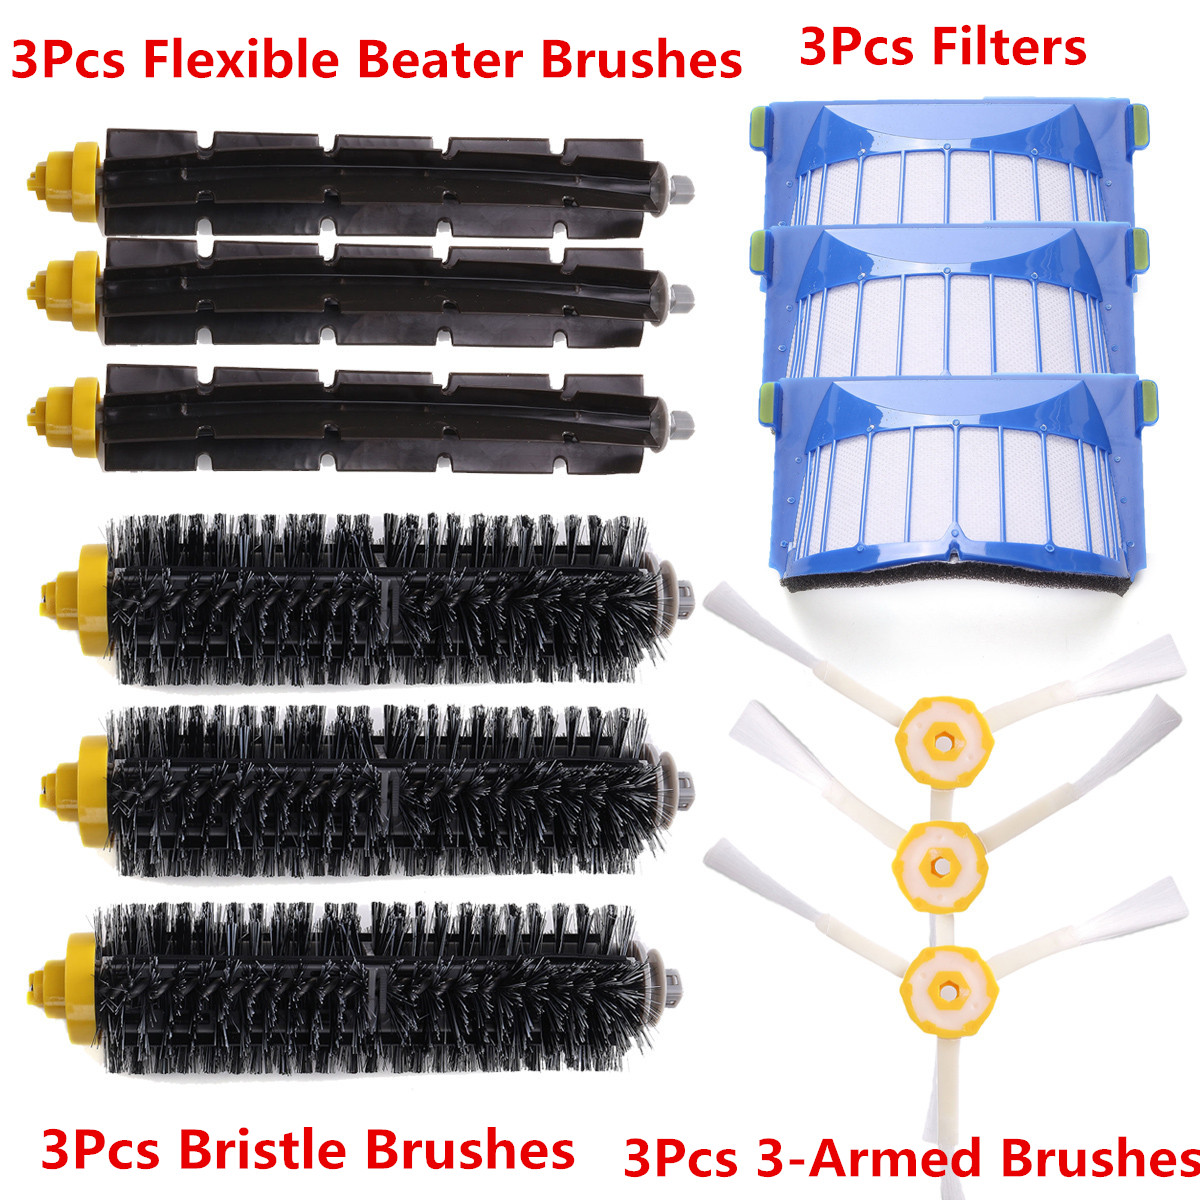 Accessory-Replacement-Kit-Brushes-Brushes-3-Armed-Aero-Vac-Filter-for-iRobot-600-Series-1338065-1